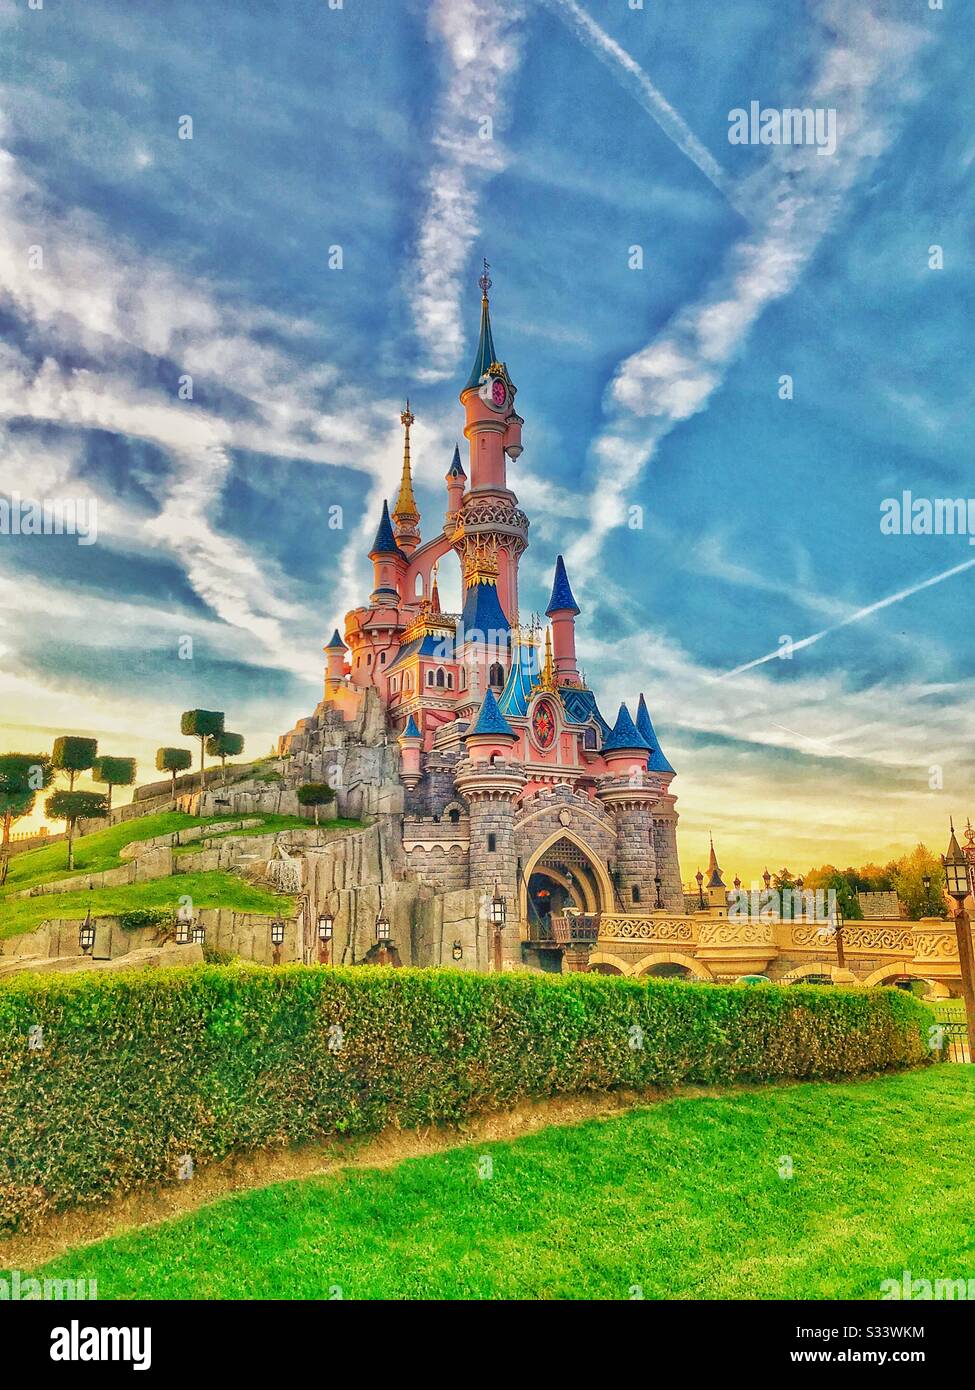 The happiest place in earth at sunset. Disneyland Paris Stock Photo